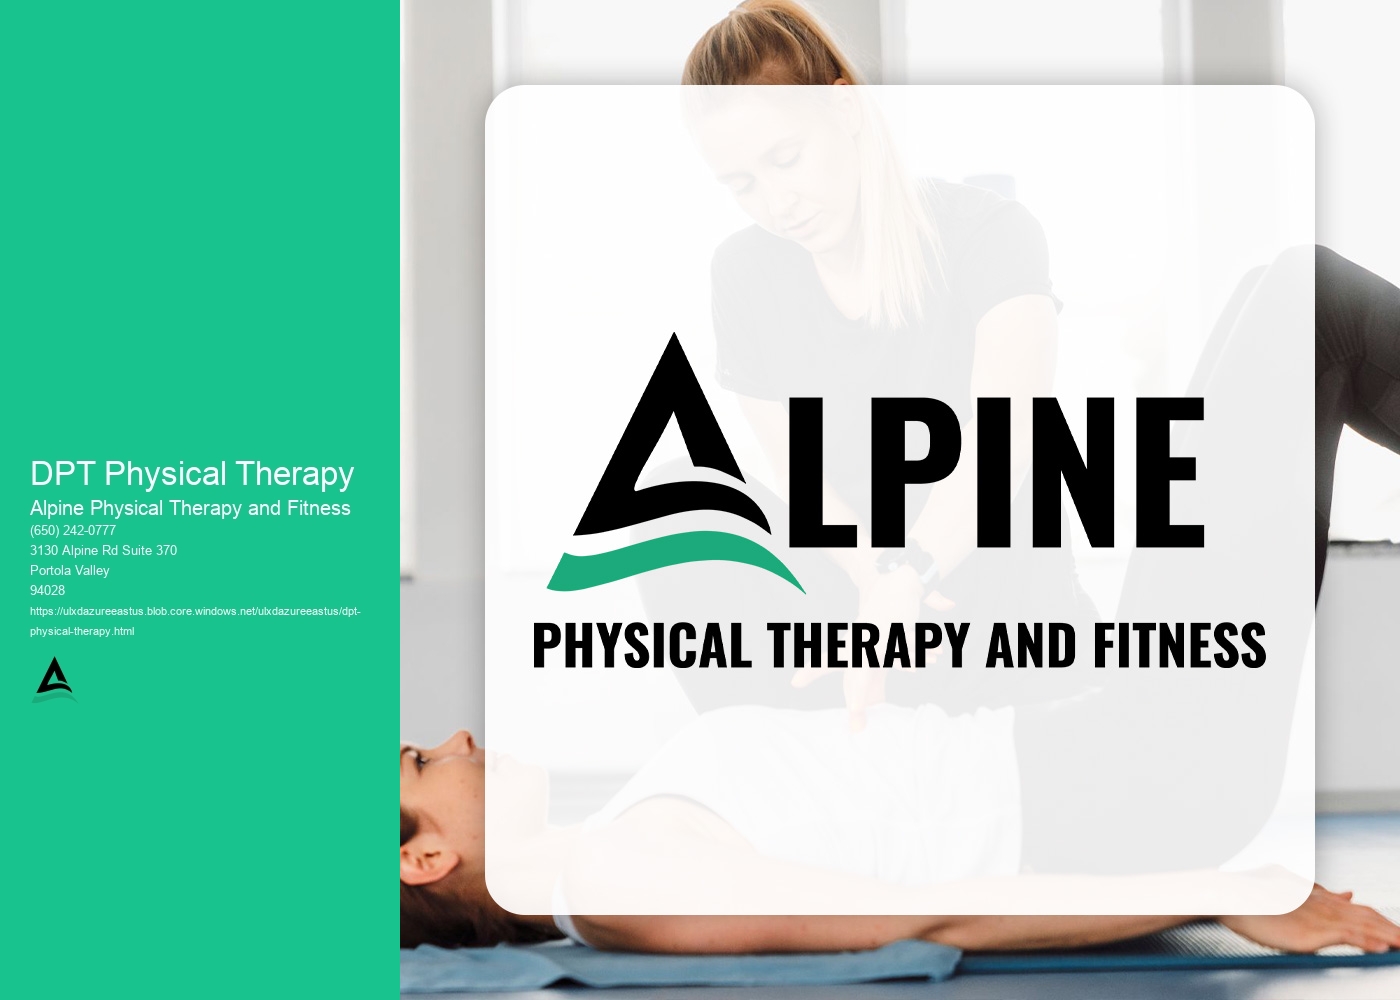 How does DPT physical therapy integrate manual therapy techniques into treatment plans?